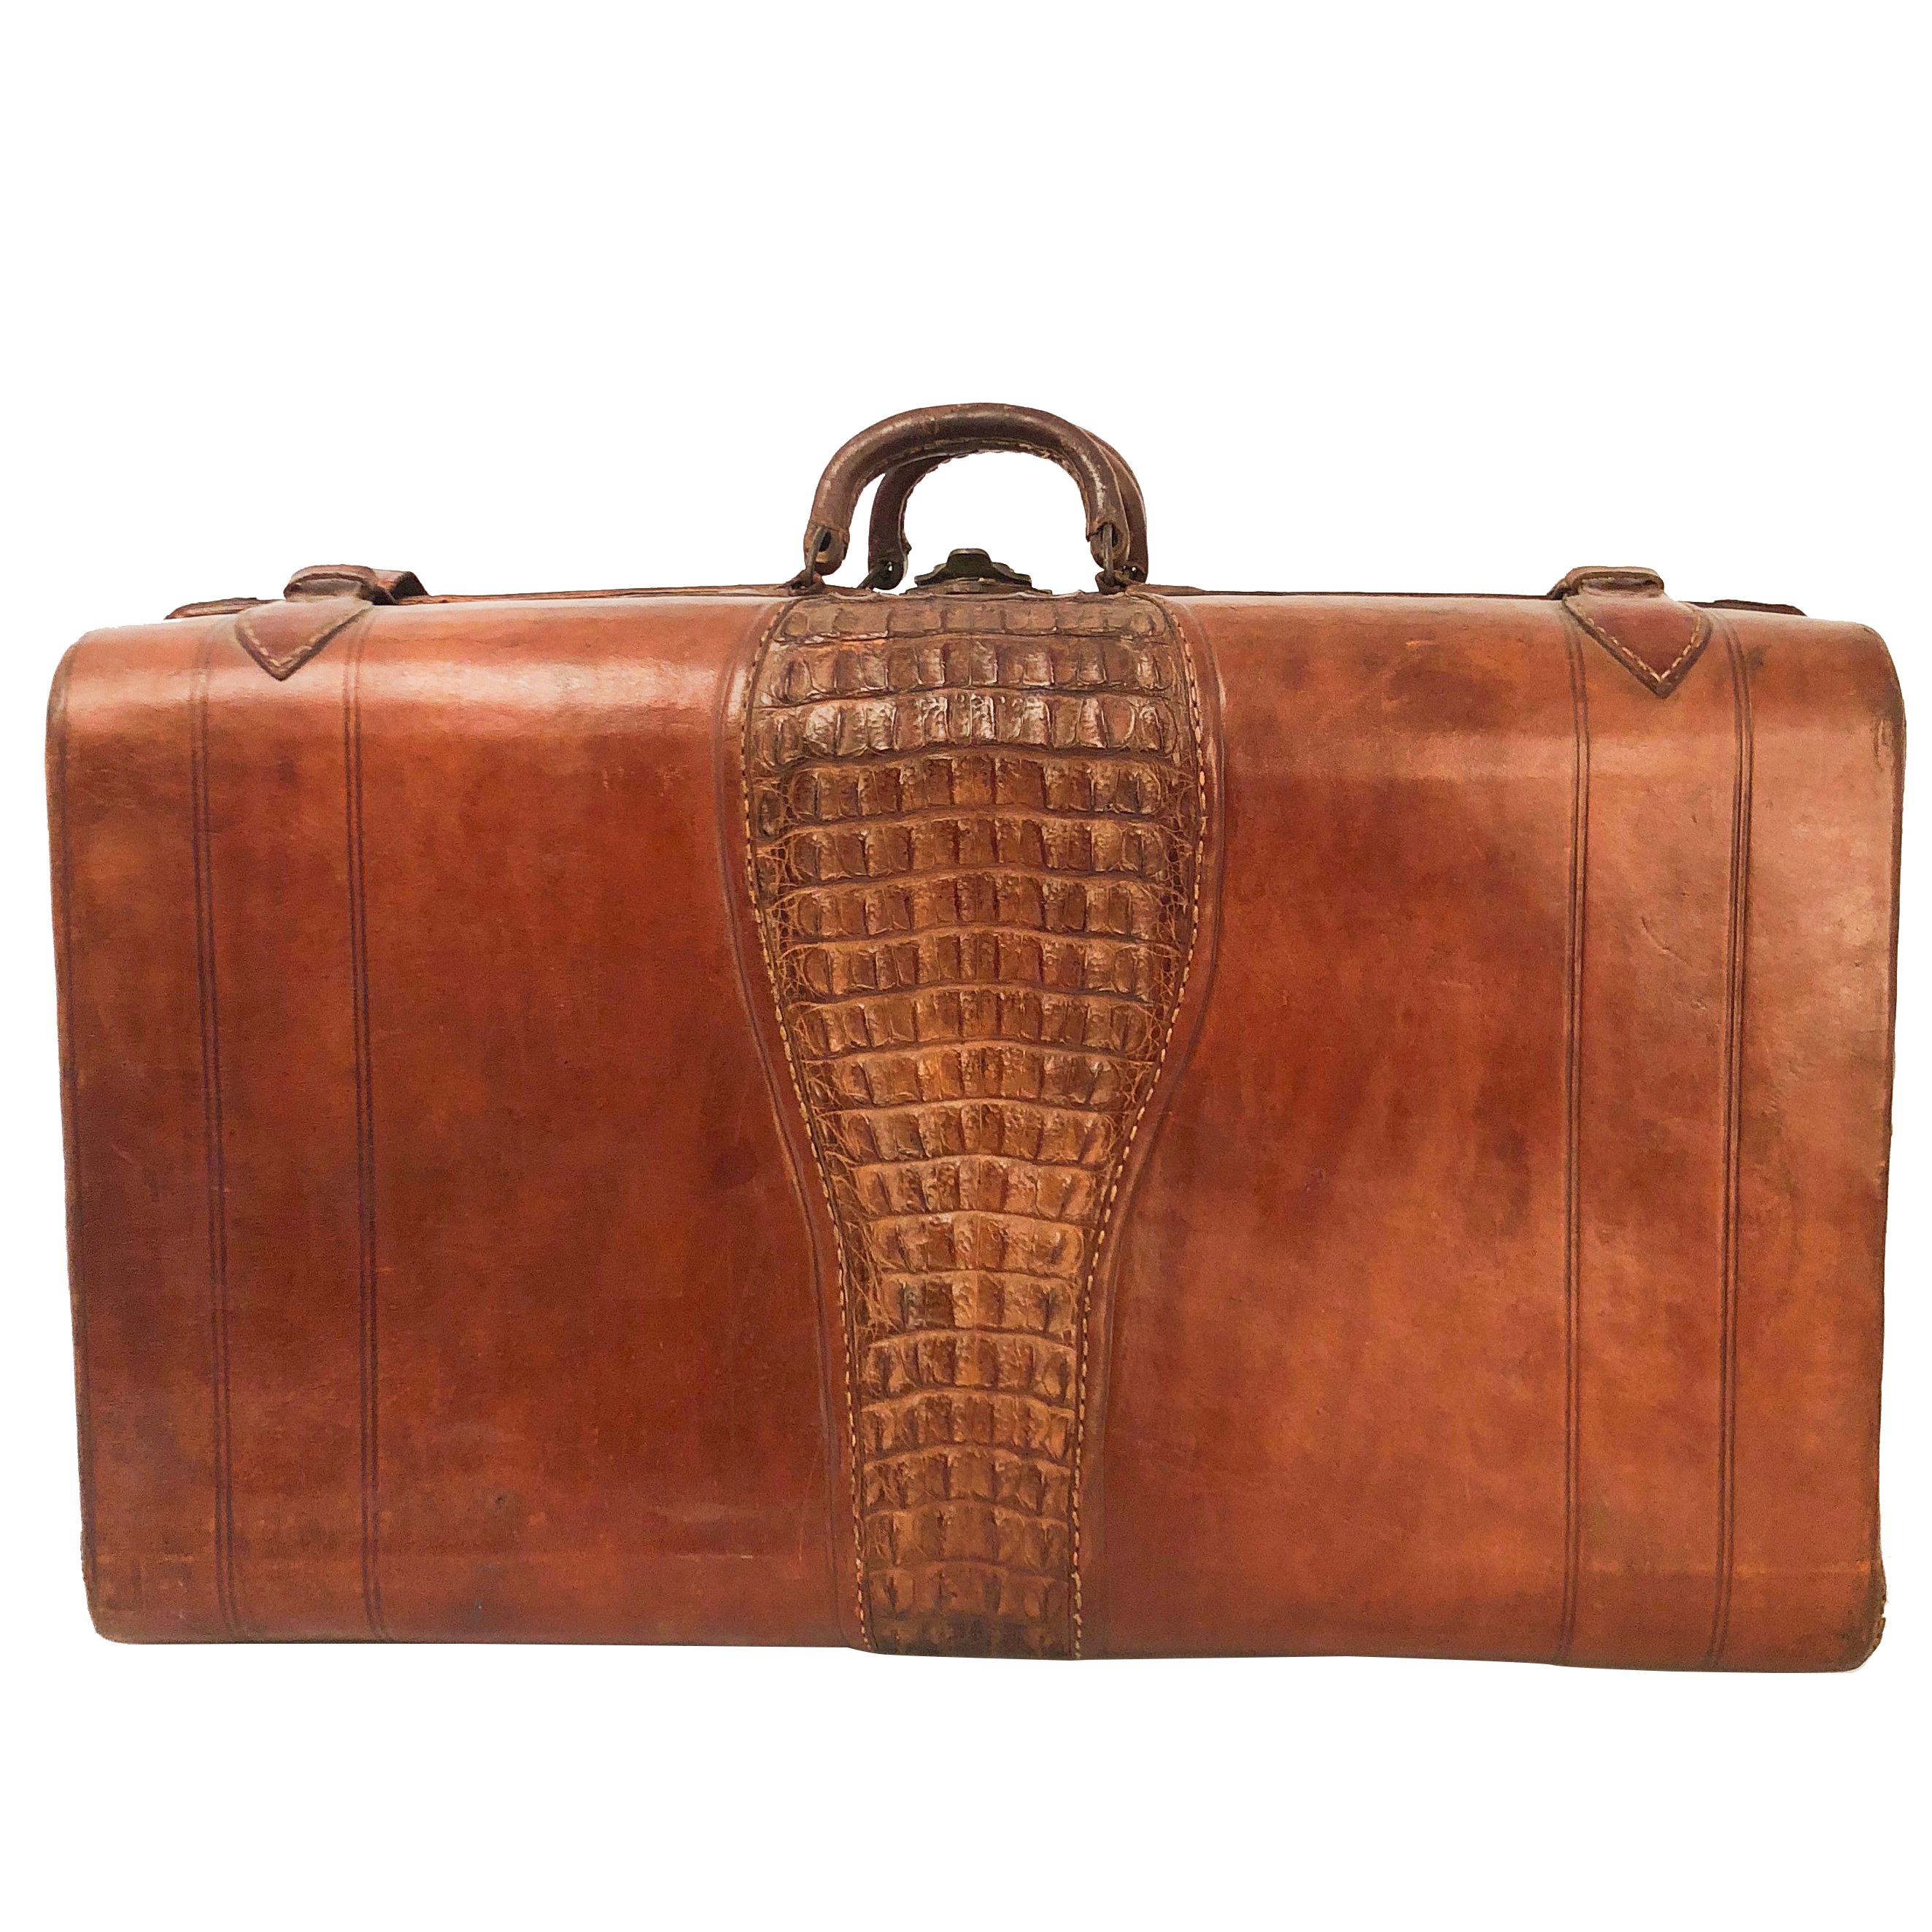 1930's Cayman and Leather Suitcase